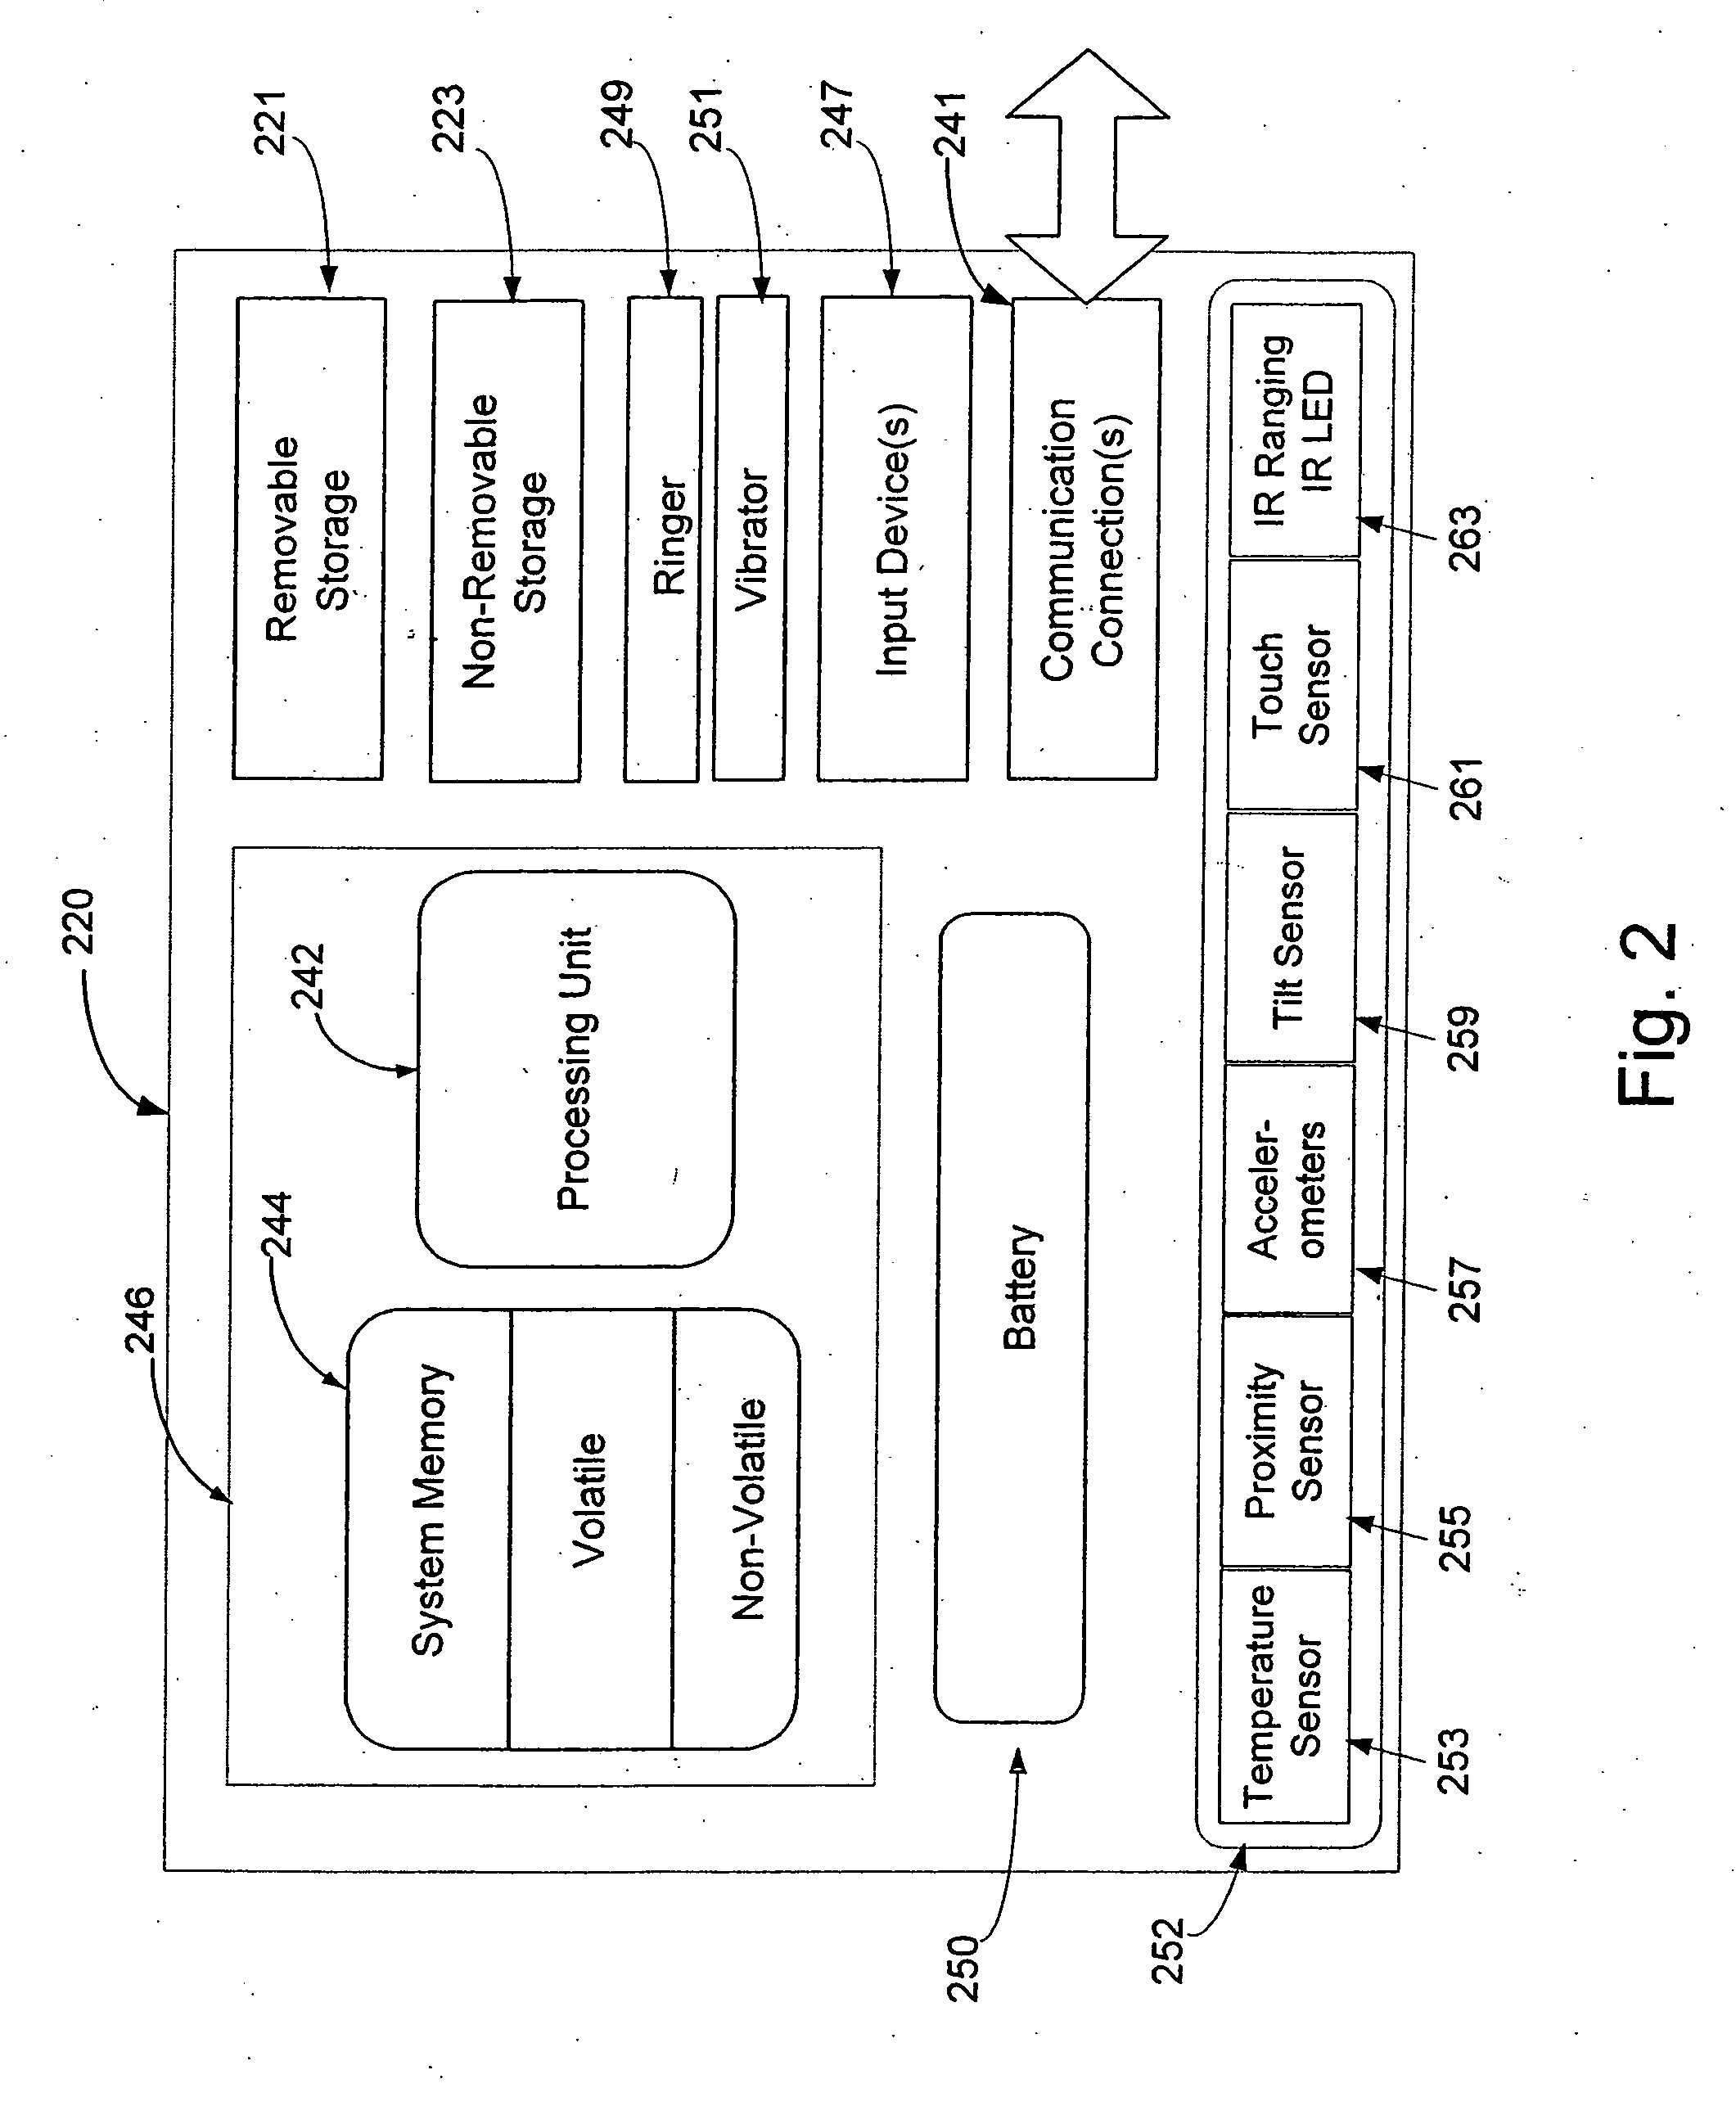 Reducing power consumption in a networked battery-operated device using sensors